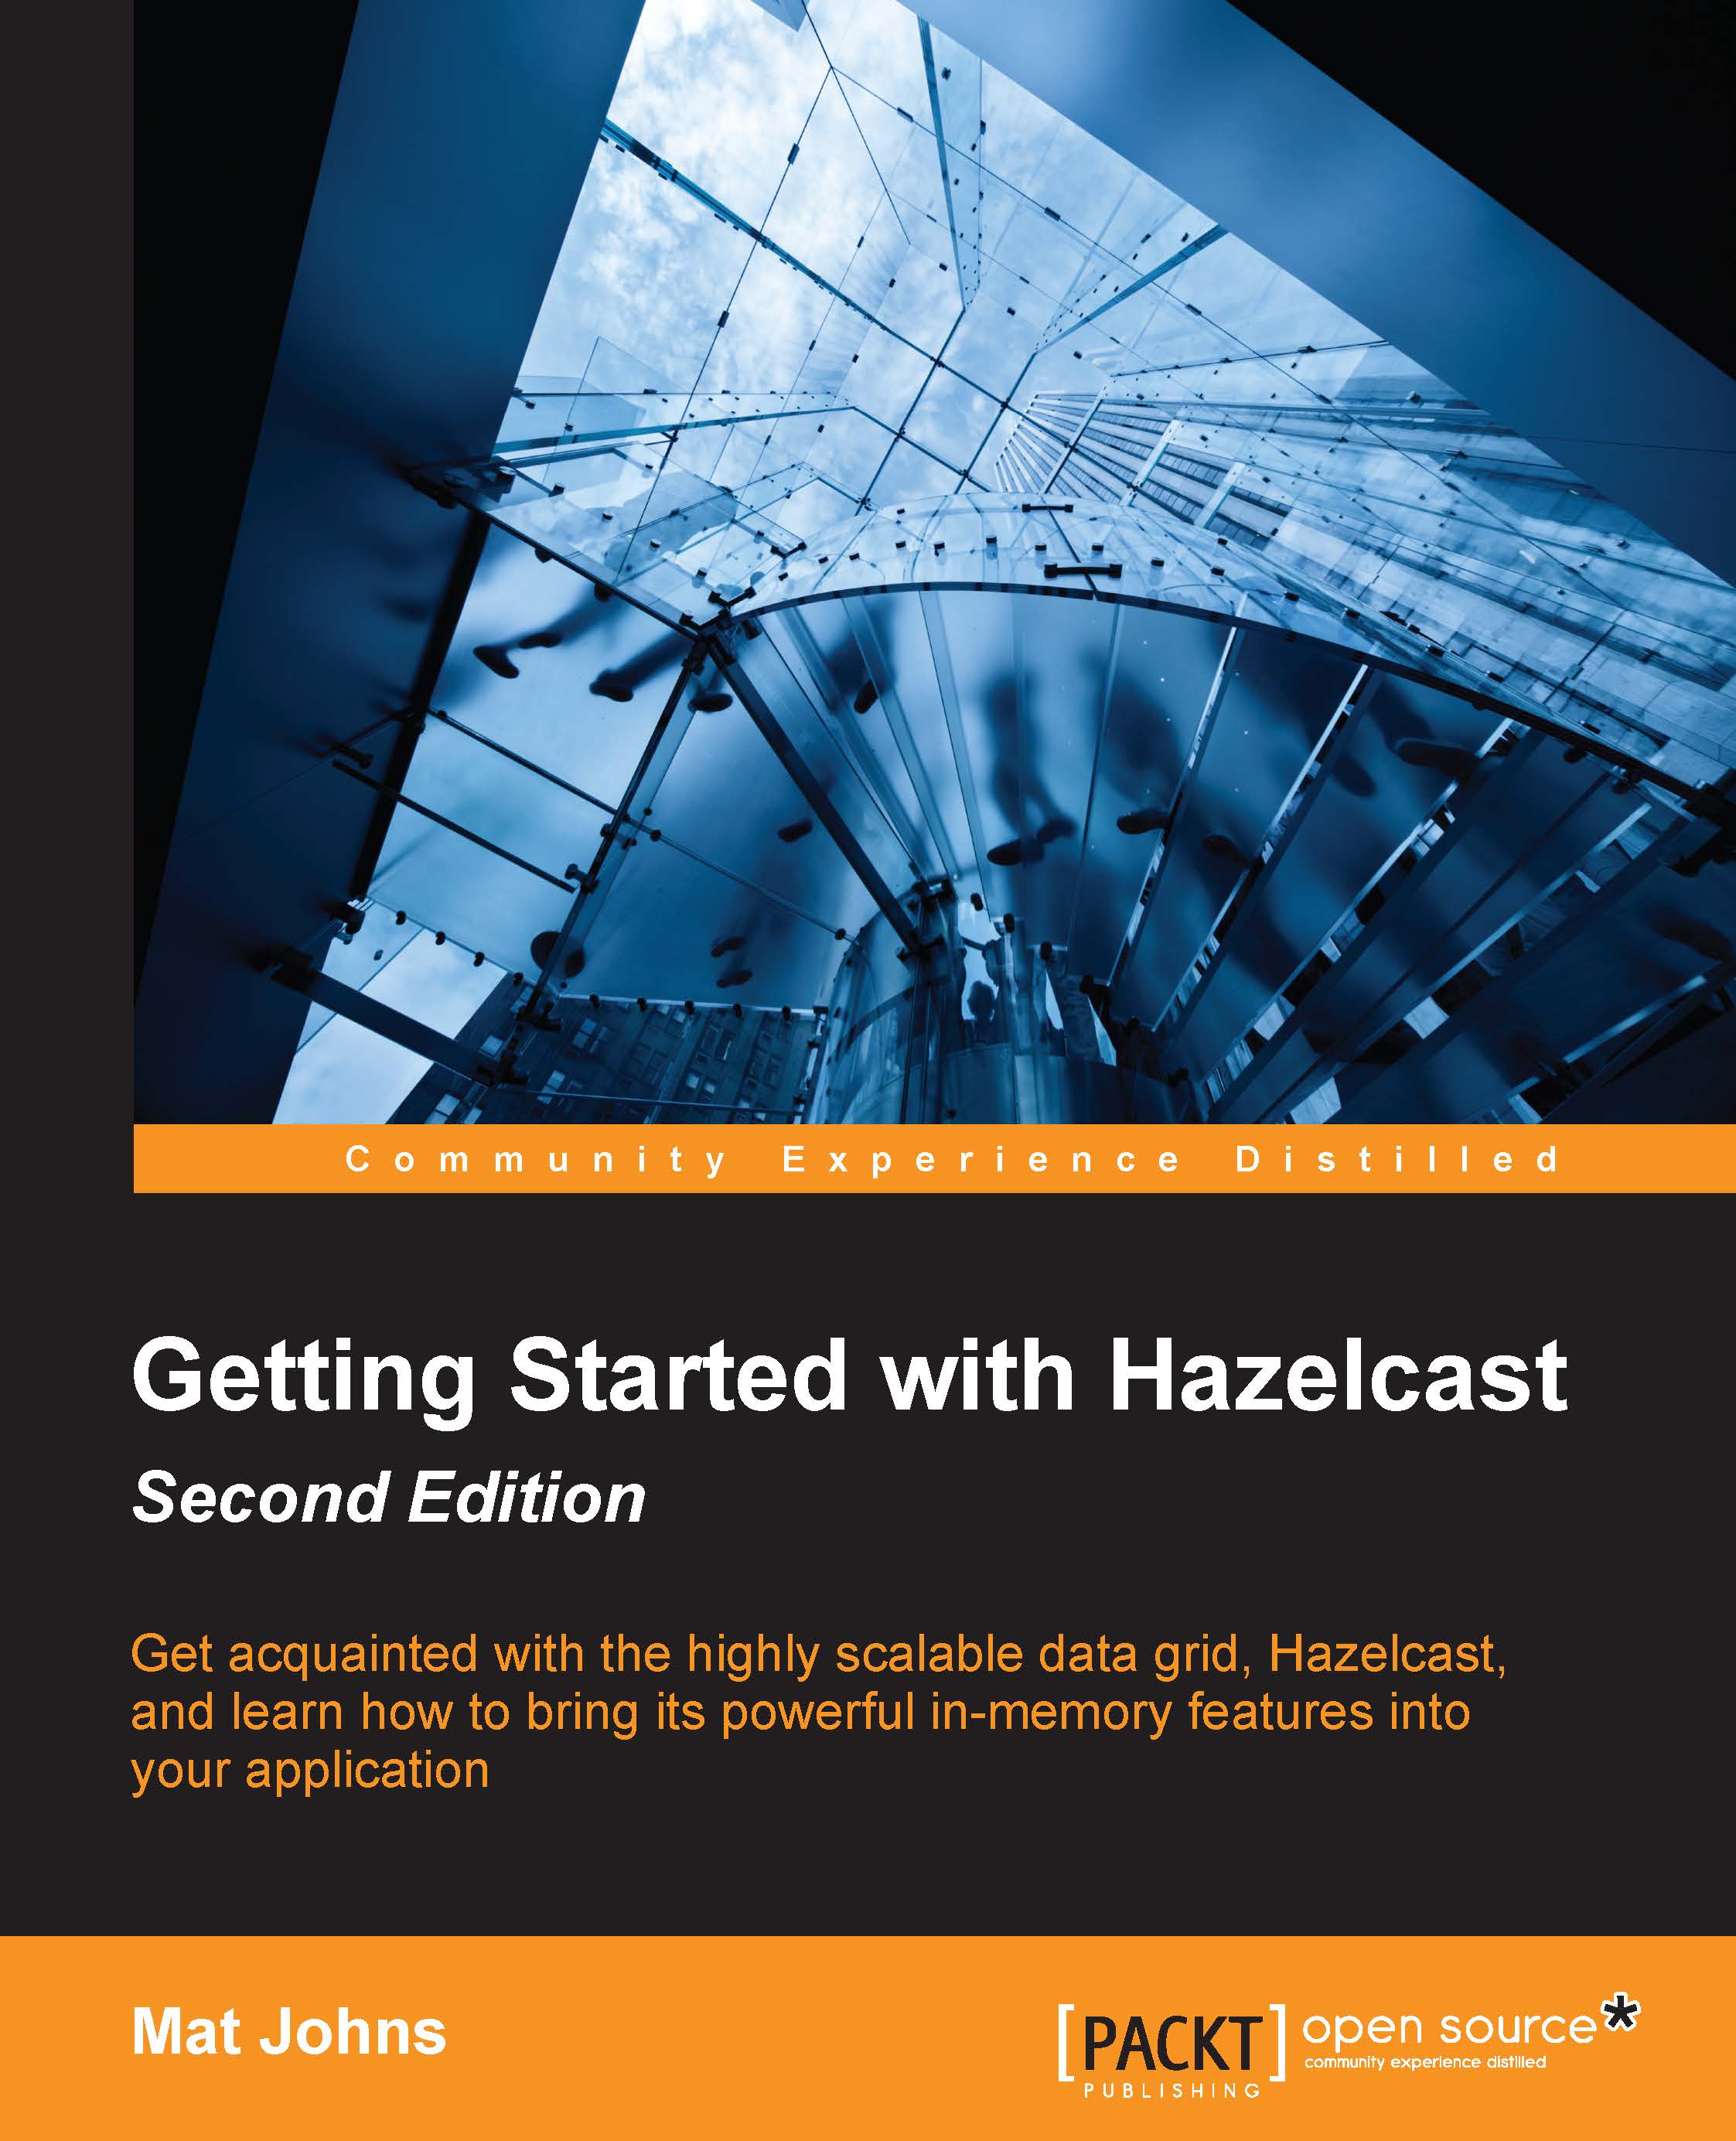 Getting Started with Hazelcast, Second Edition